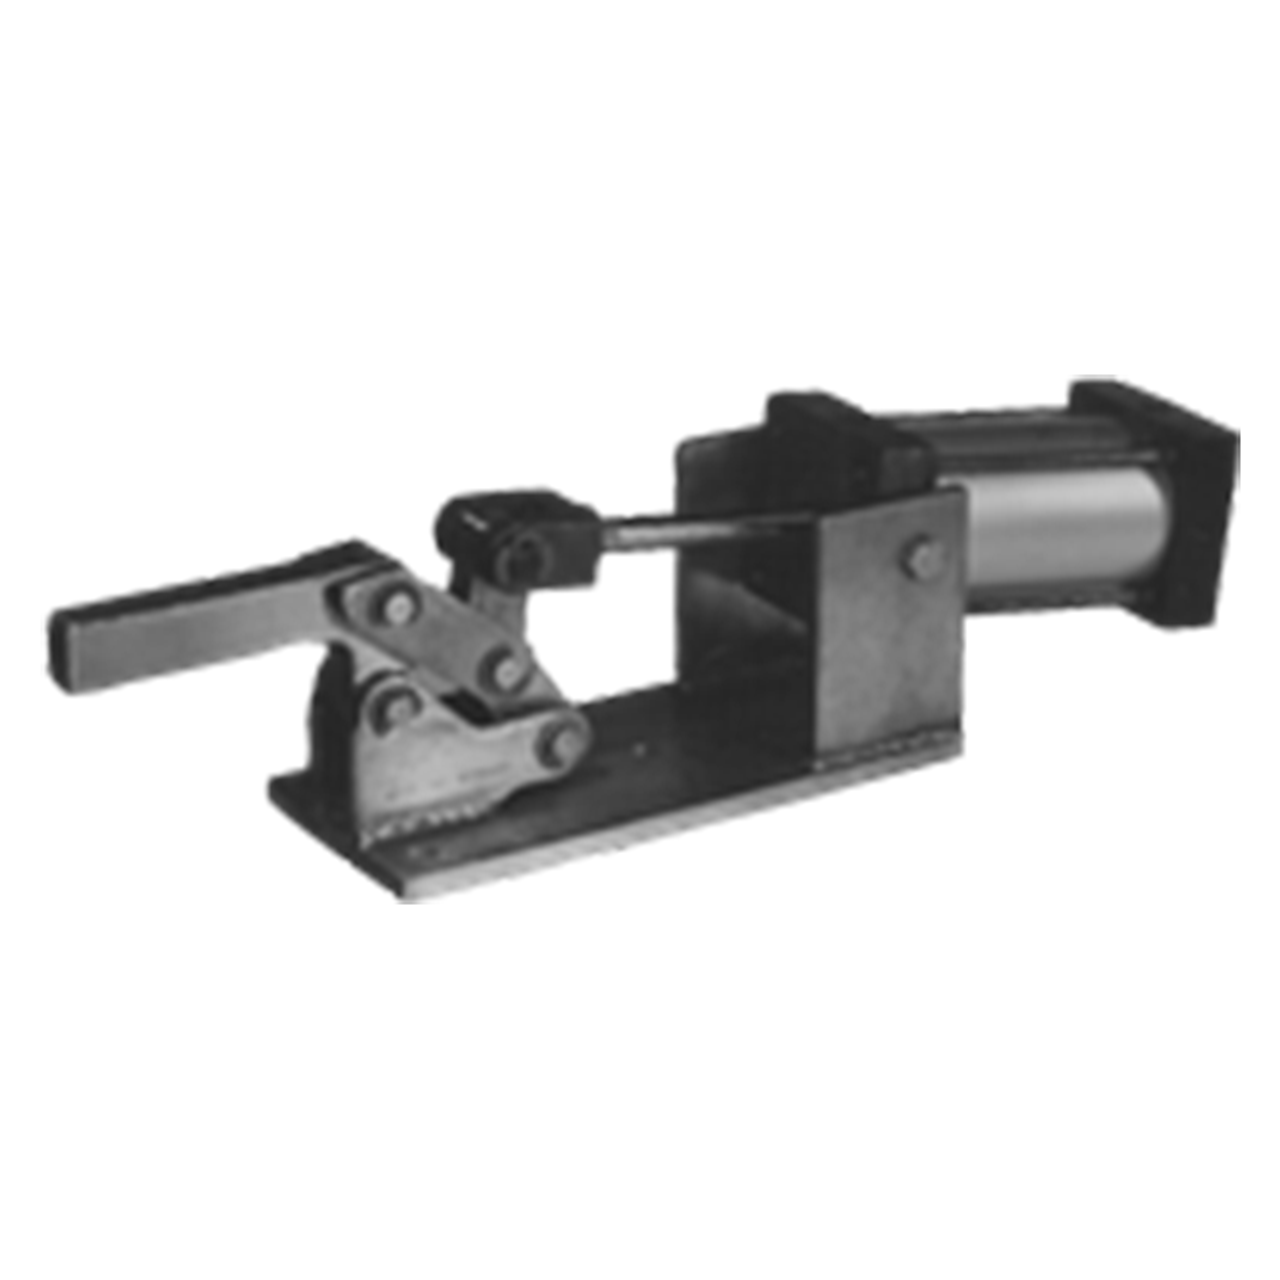 Toggle Clamp Holding Capacity & Clamping Force